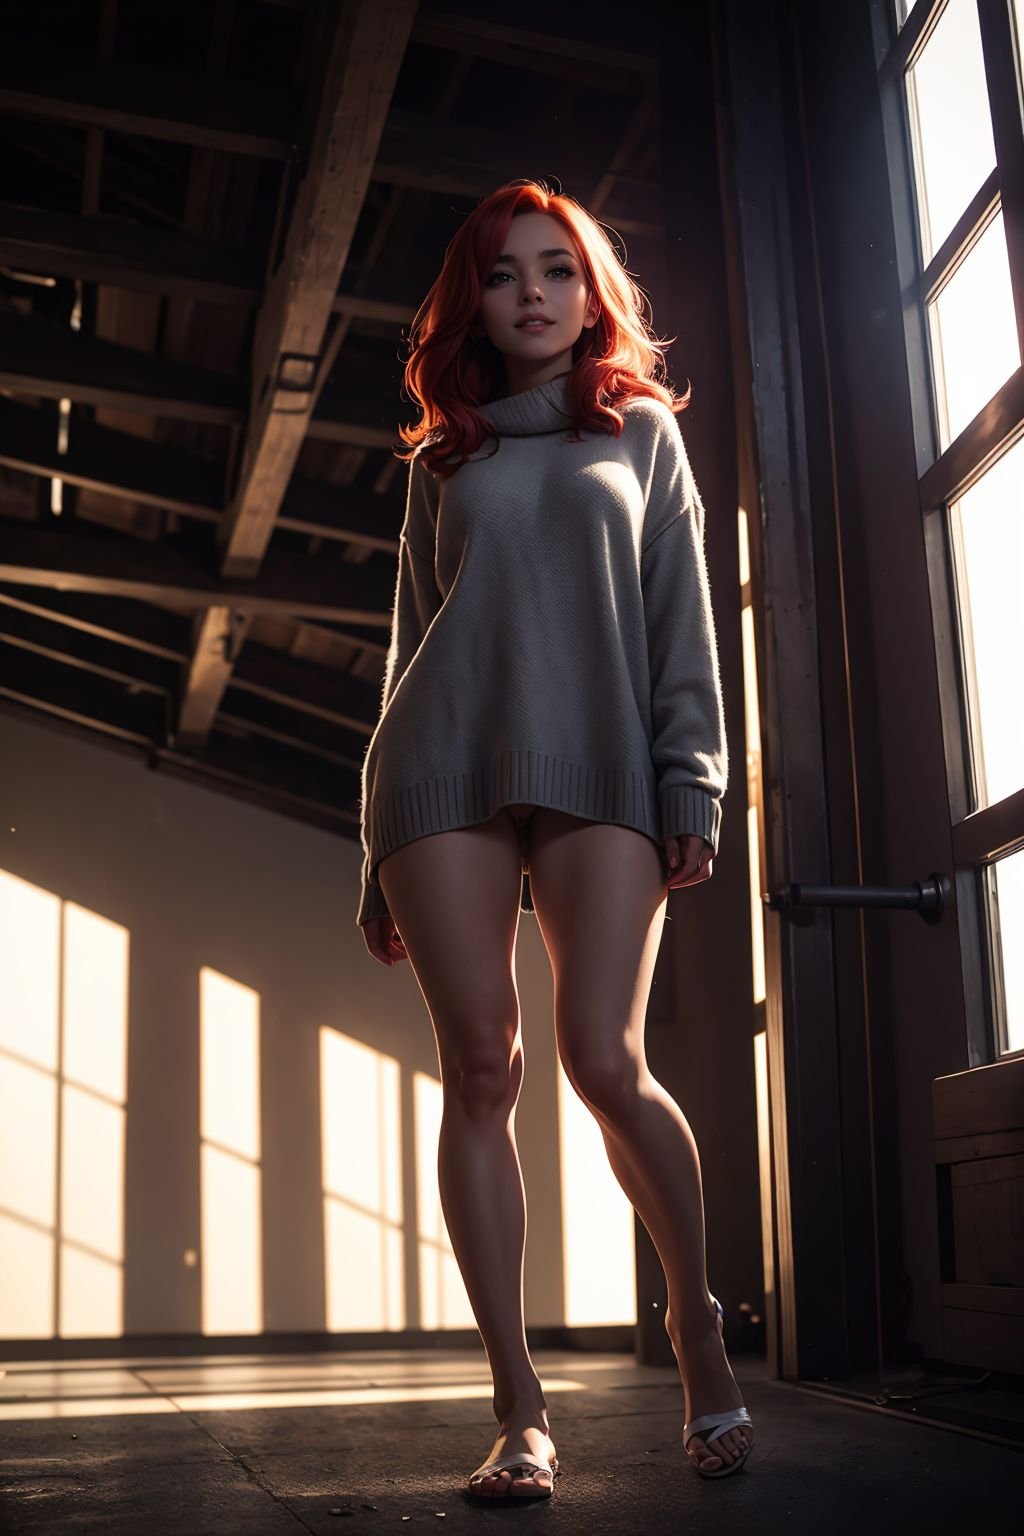 masterpiece, best quality, 8k, moody instagram photo, lower body photo of 32 years old woman, from below, dressed in long oversized sweater, teasing nudity, dirty fiery red hair, color gradient, bright tips of hair, sun-kissed skin, happy, cute smile, beautiful hazelnut eyes, hard shadows, dark, nighttime, overexposed filter, silhouetted against the bright light, Finely Articulated, Crisp Definition, 35mm photograph, high resolution, detailed, raw photo